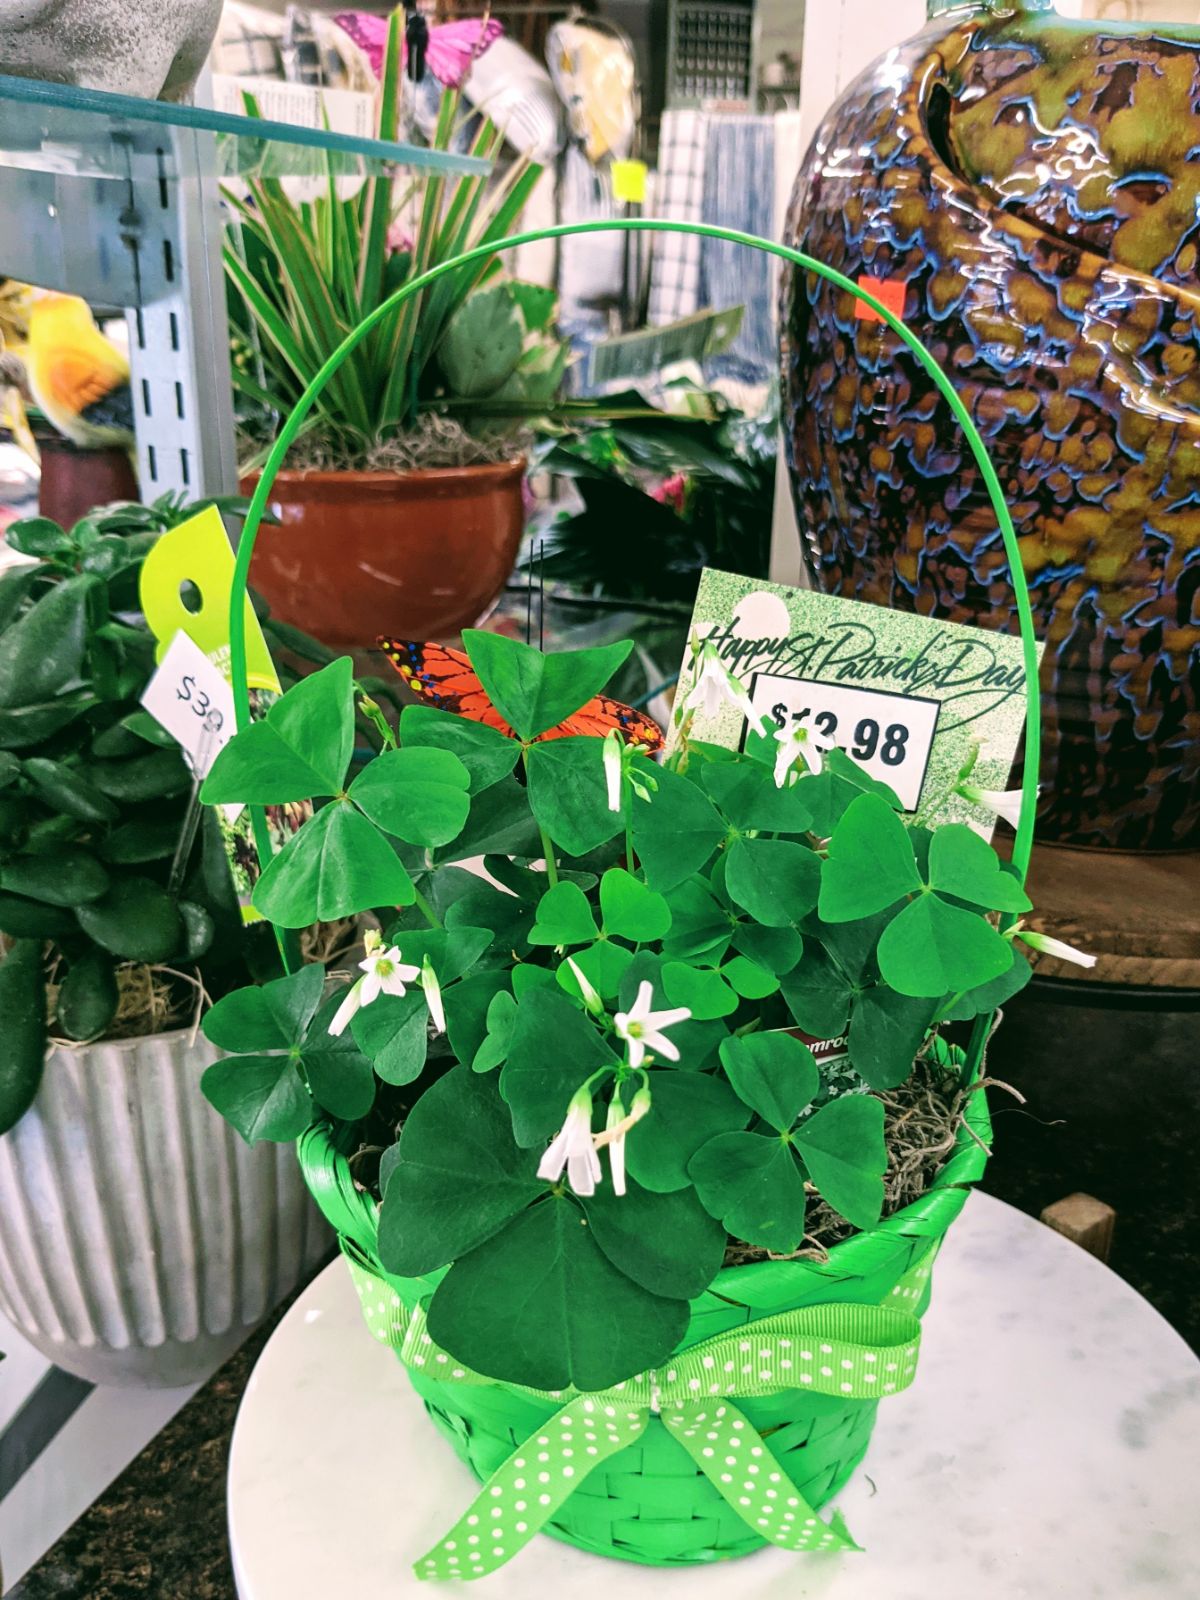 An Irish flower basket with shamrocks for St. Patrick's Day at Wendy's Flowers in Gilbertsville